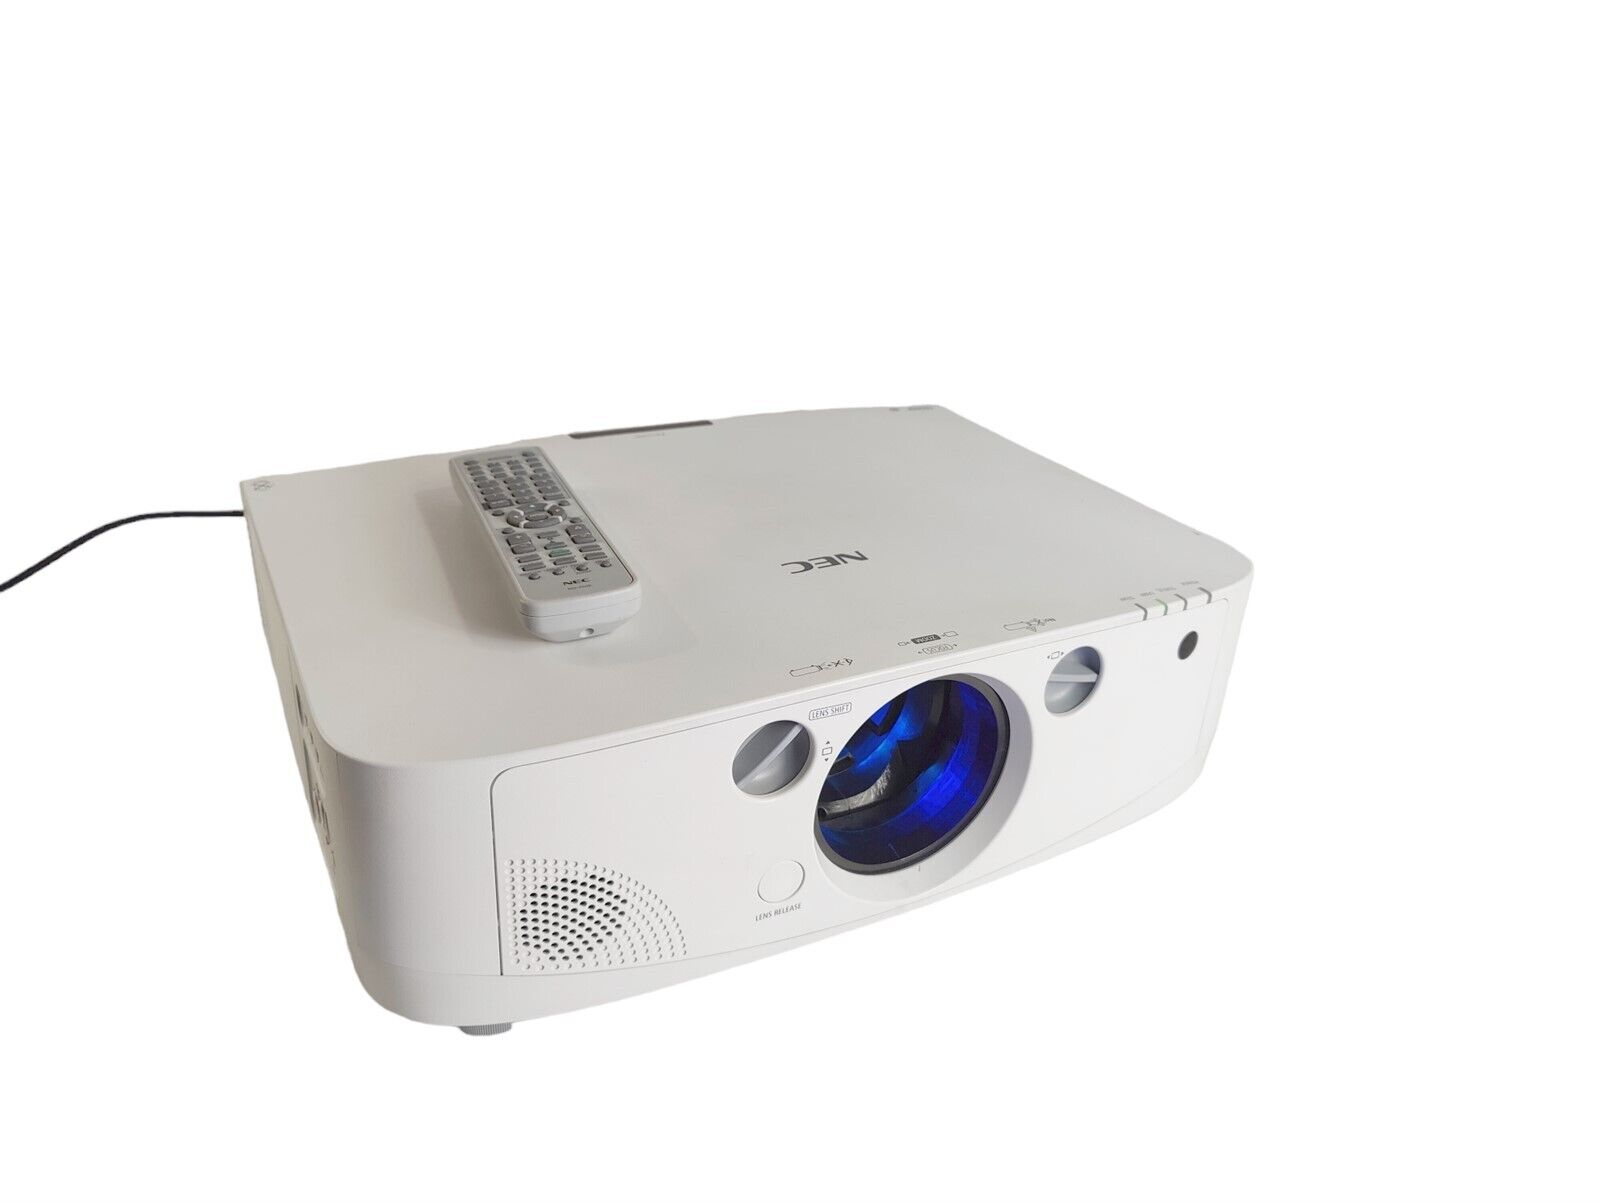 NEC NP-PA550W WXGA 3LCD Widescreen Projector 5500 Lumen 2497 Lamp Hours W/Remote